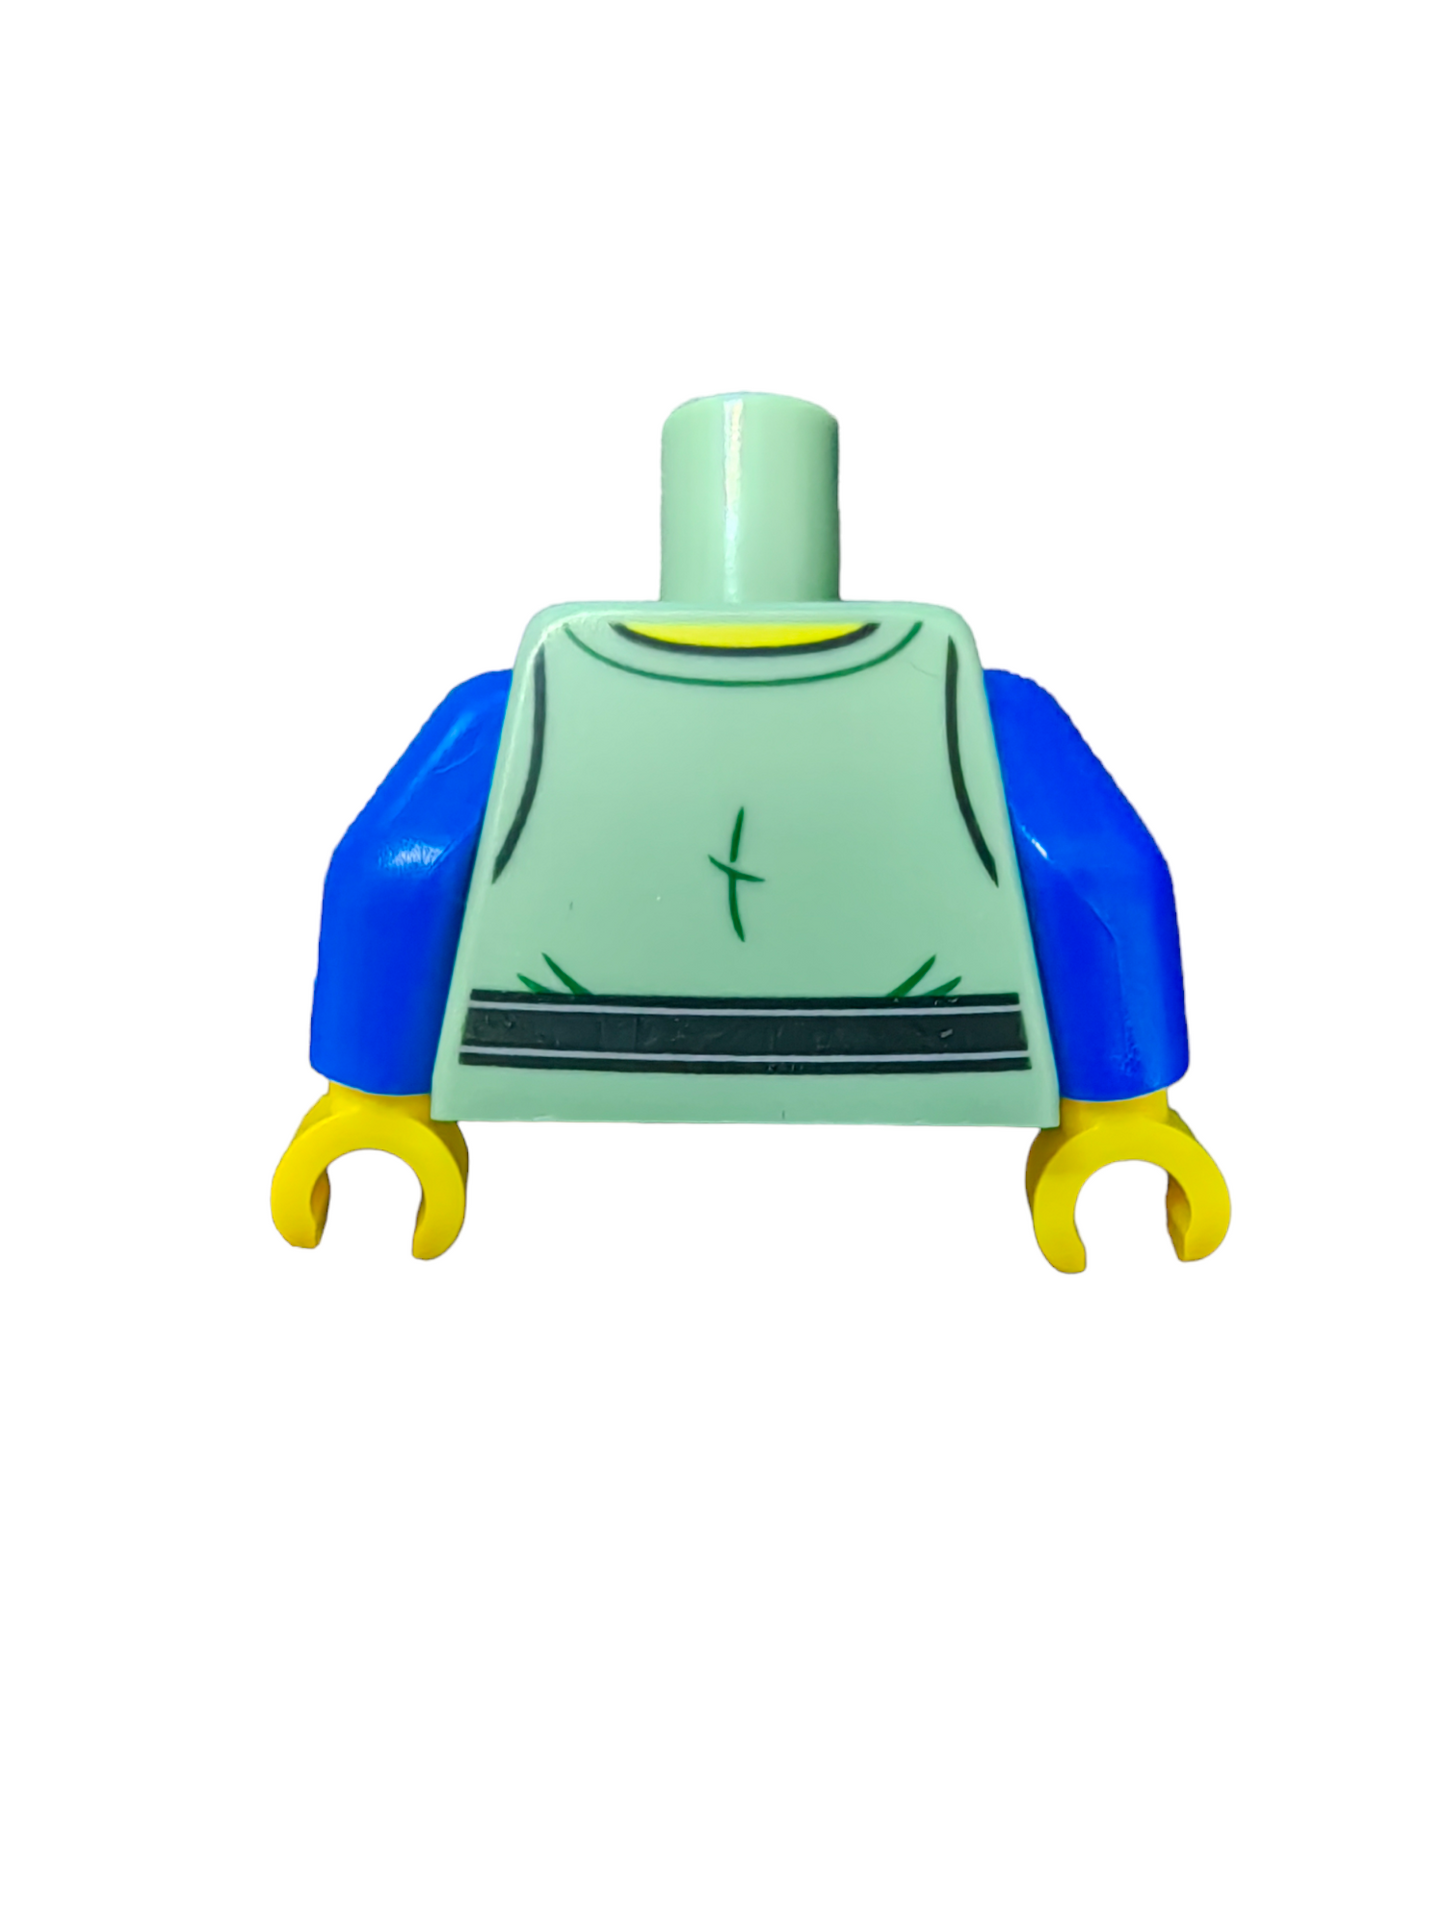 LEGO Torso, Medieval Shirt, With a Black Belt and Silver Belt Buckle, Brown Pouch. - UB1105